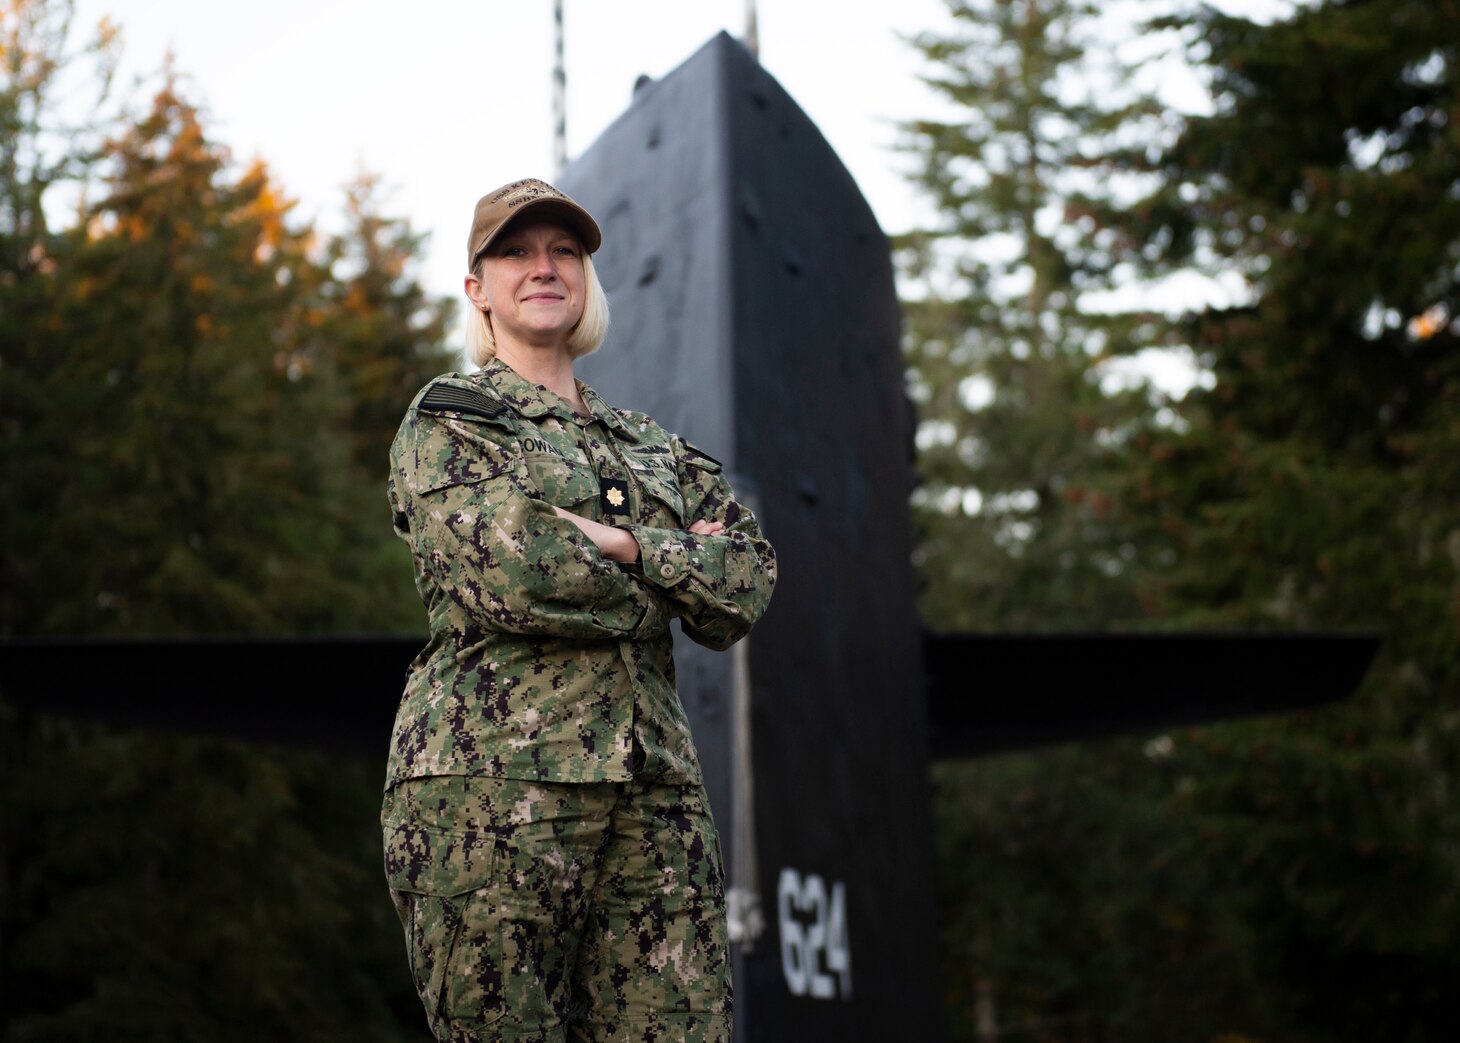 Lt. Cmdr. Amber Cowan, the executive officer of the gold crew of the Ohio-class ballistic-missile submarine USS Kentucky (SSBN 737), from Colorado Springs, Colorado, poses for a portrait at Deterrent Park onboard Naval Base Kitsap – Bangor, November 18, 2022.